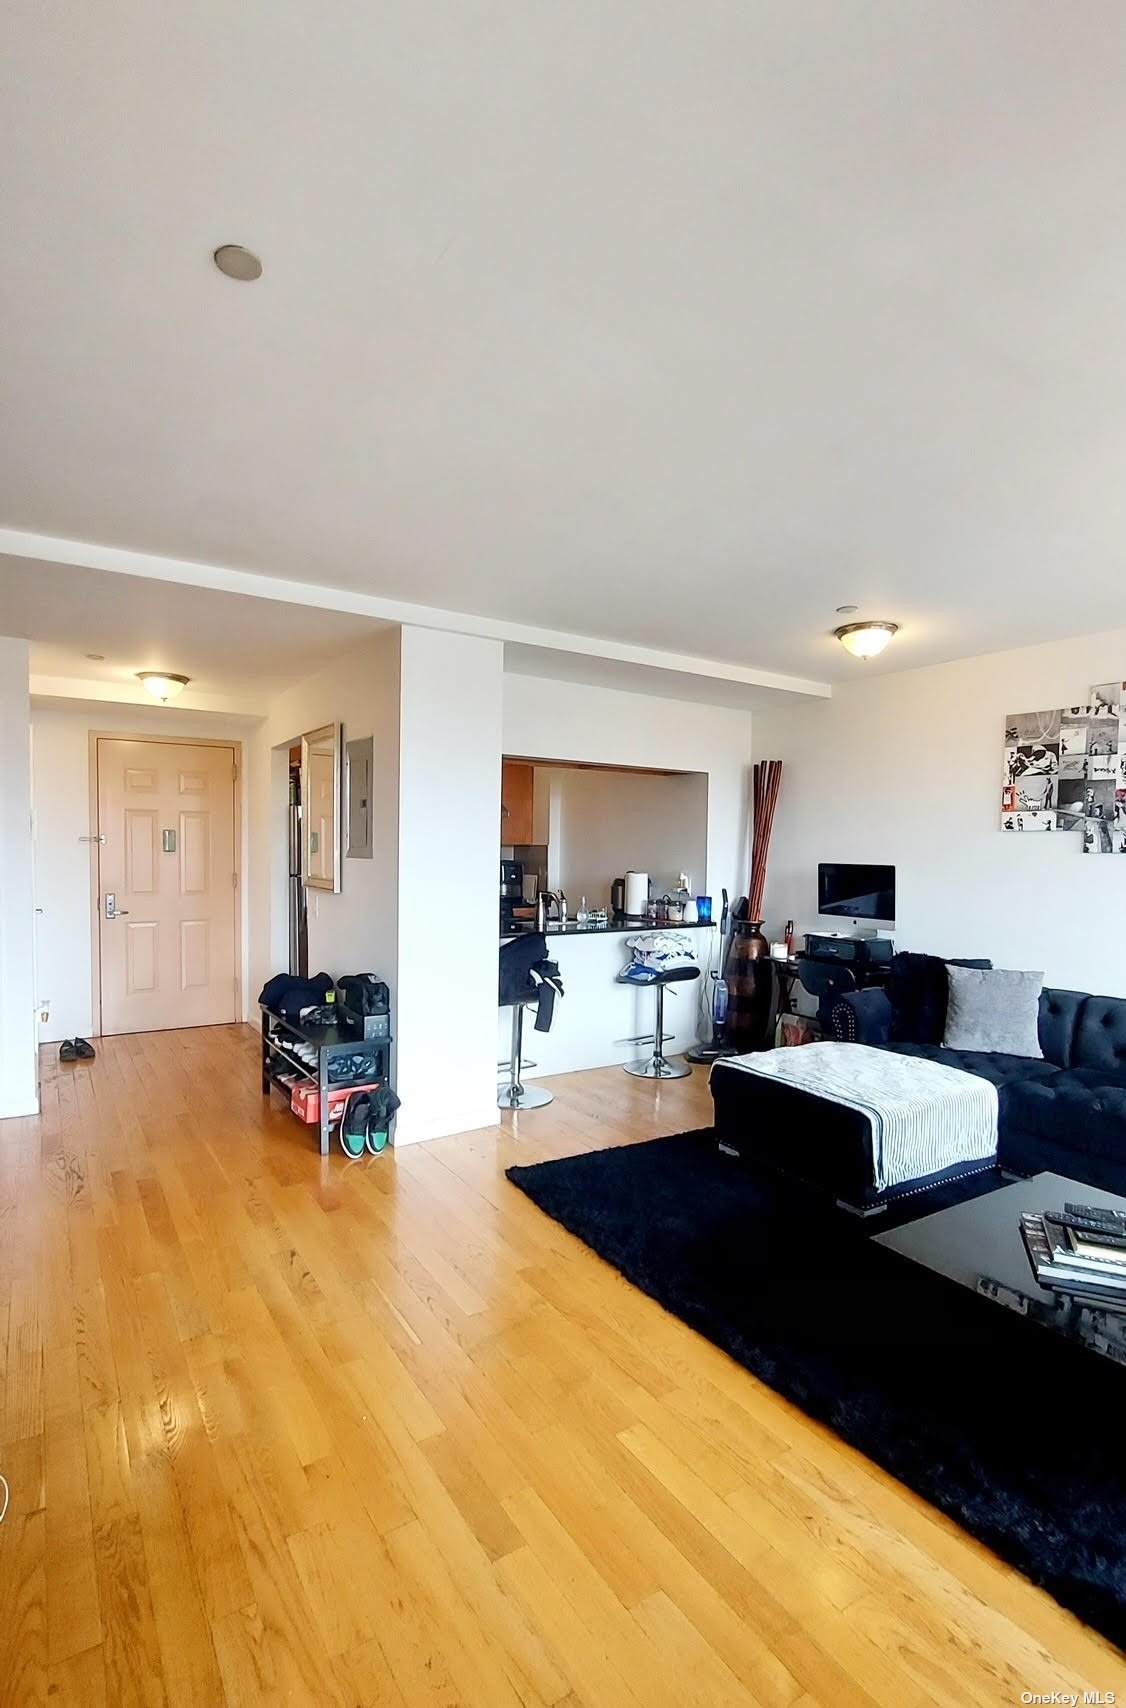 Condo in Woodside - 64th Street  Queens, NY 11377